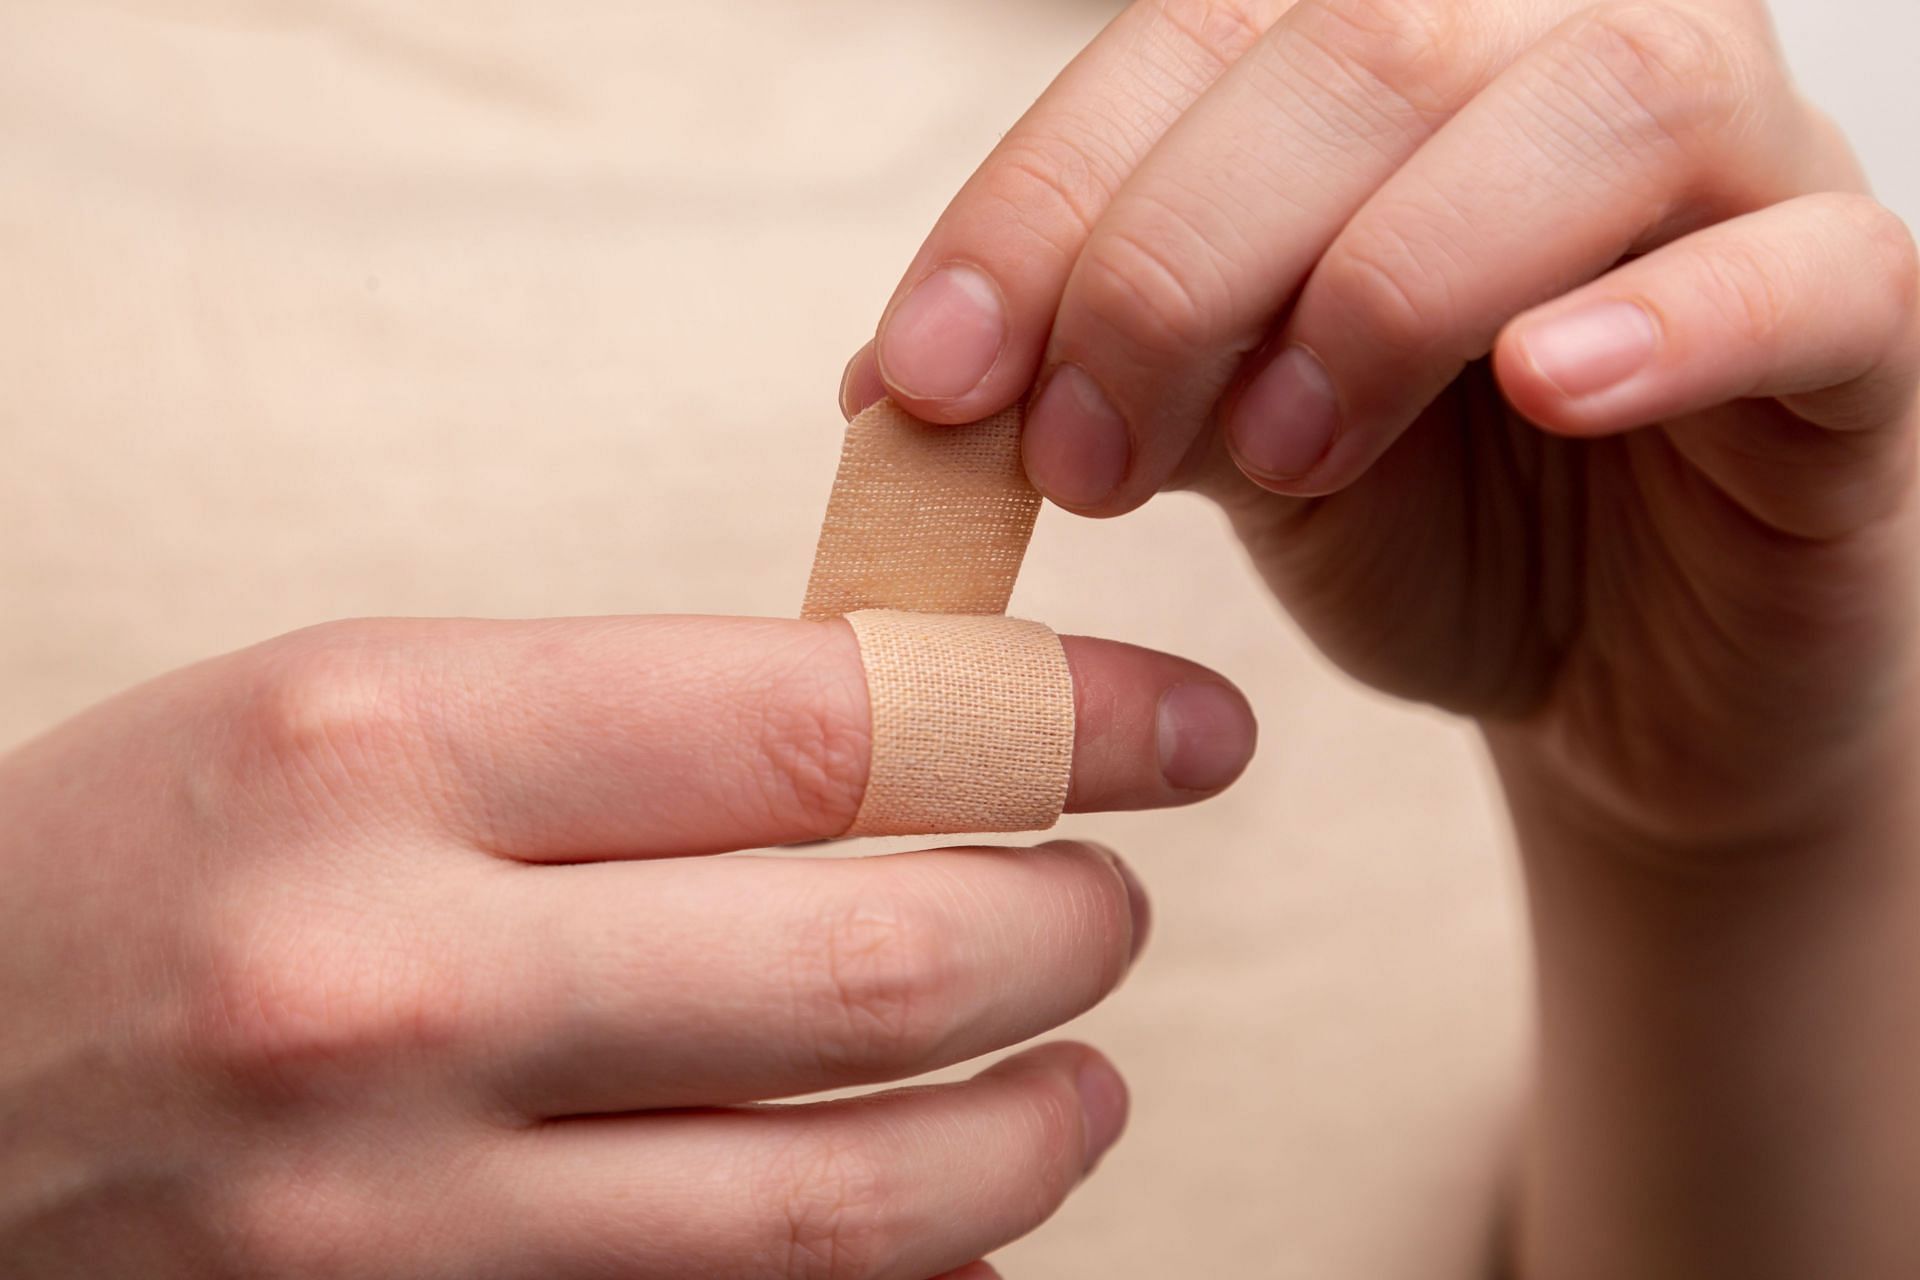 Apply a gauze on blister so that it does not get infected. (Image via Unsplash/Diana Polekhina)